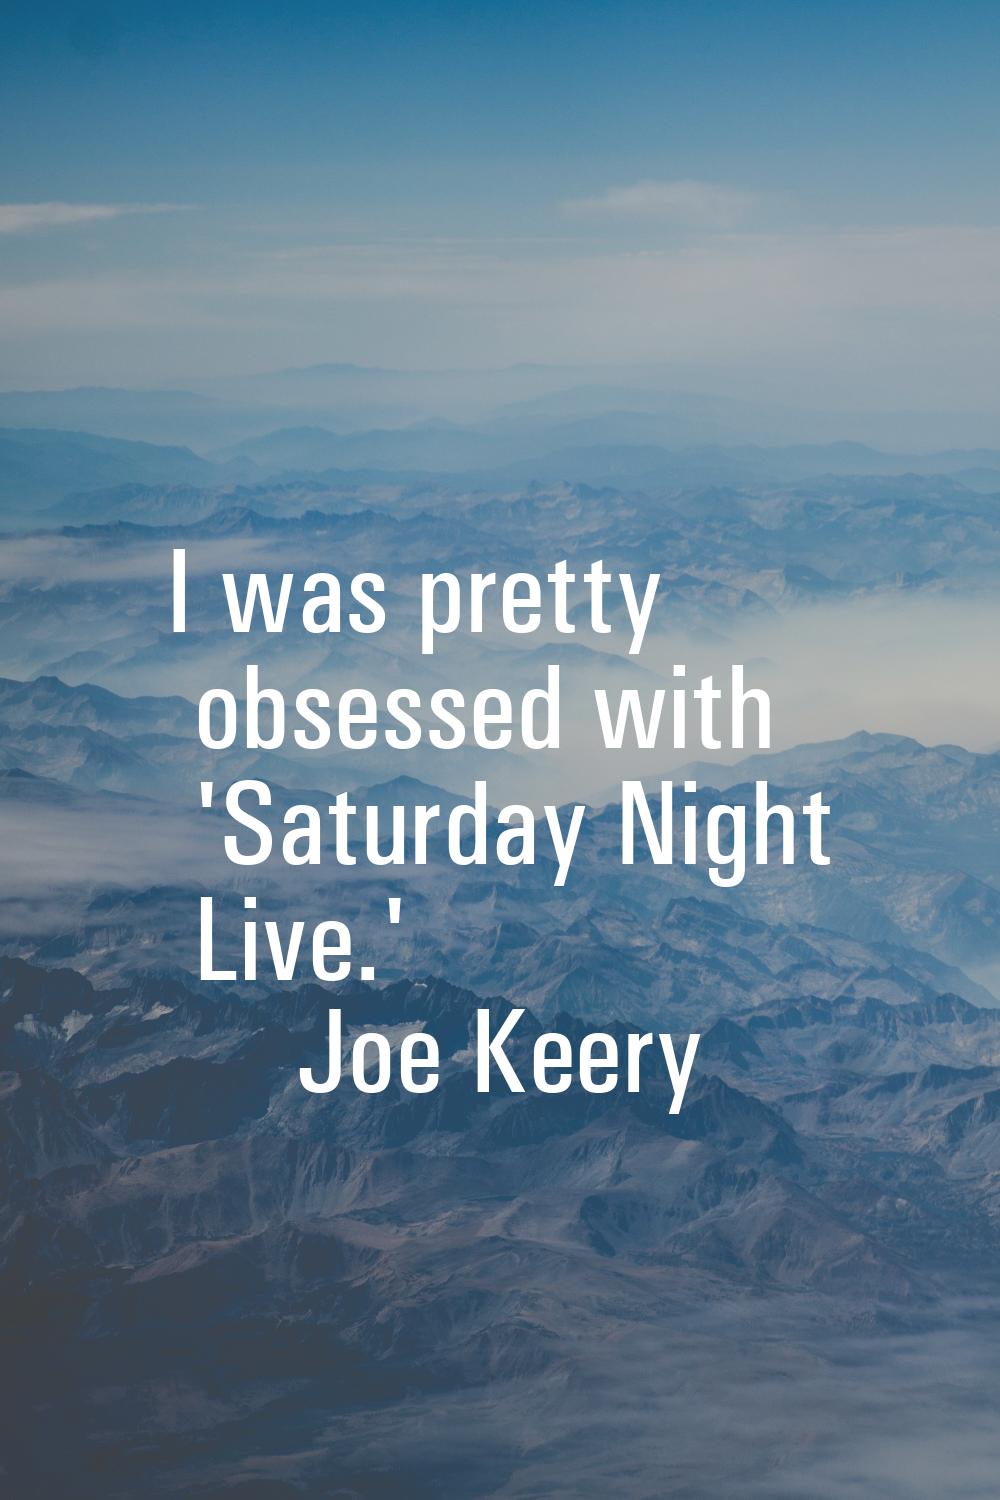 I was pretty obsessed with 'Saturday Night Live.'